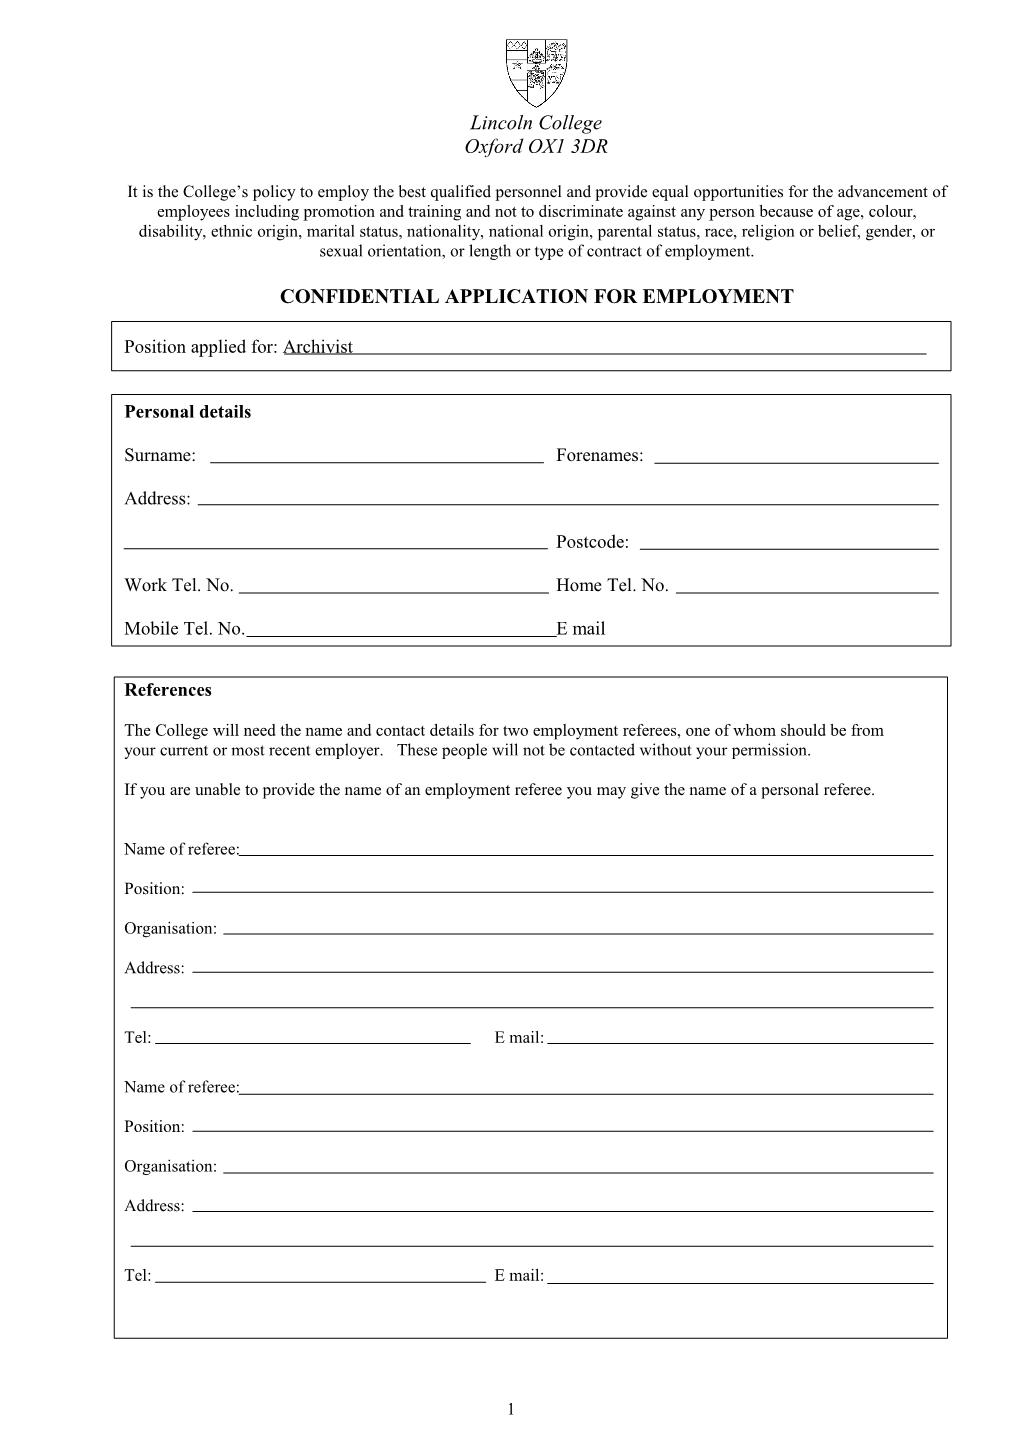 Confidential Application for Employment s3